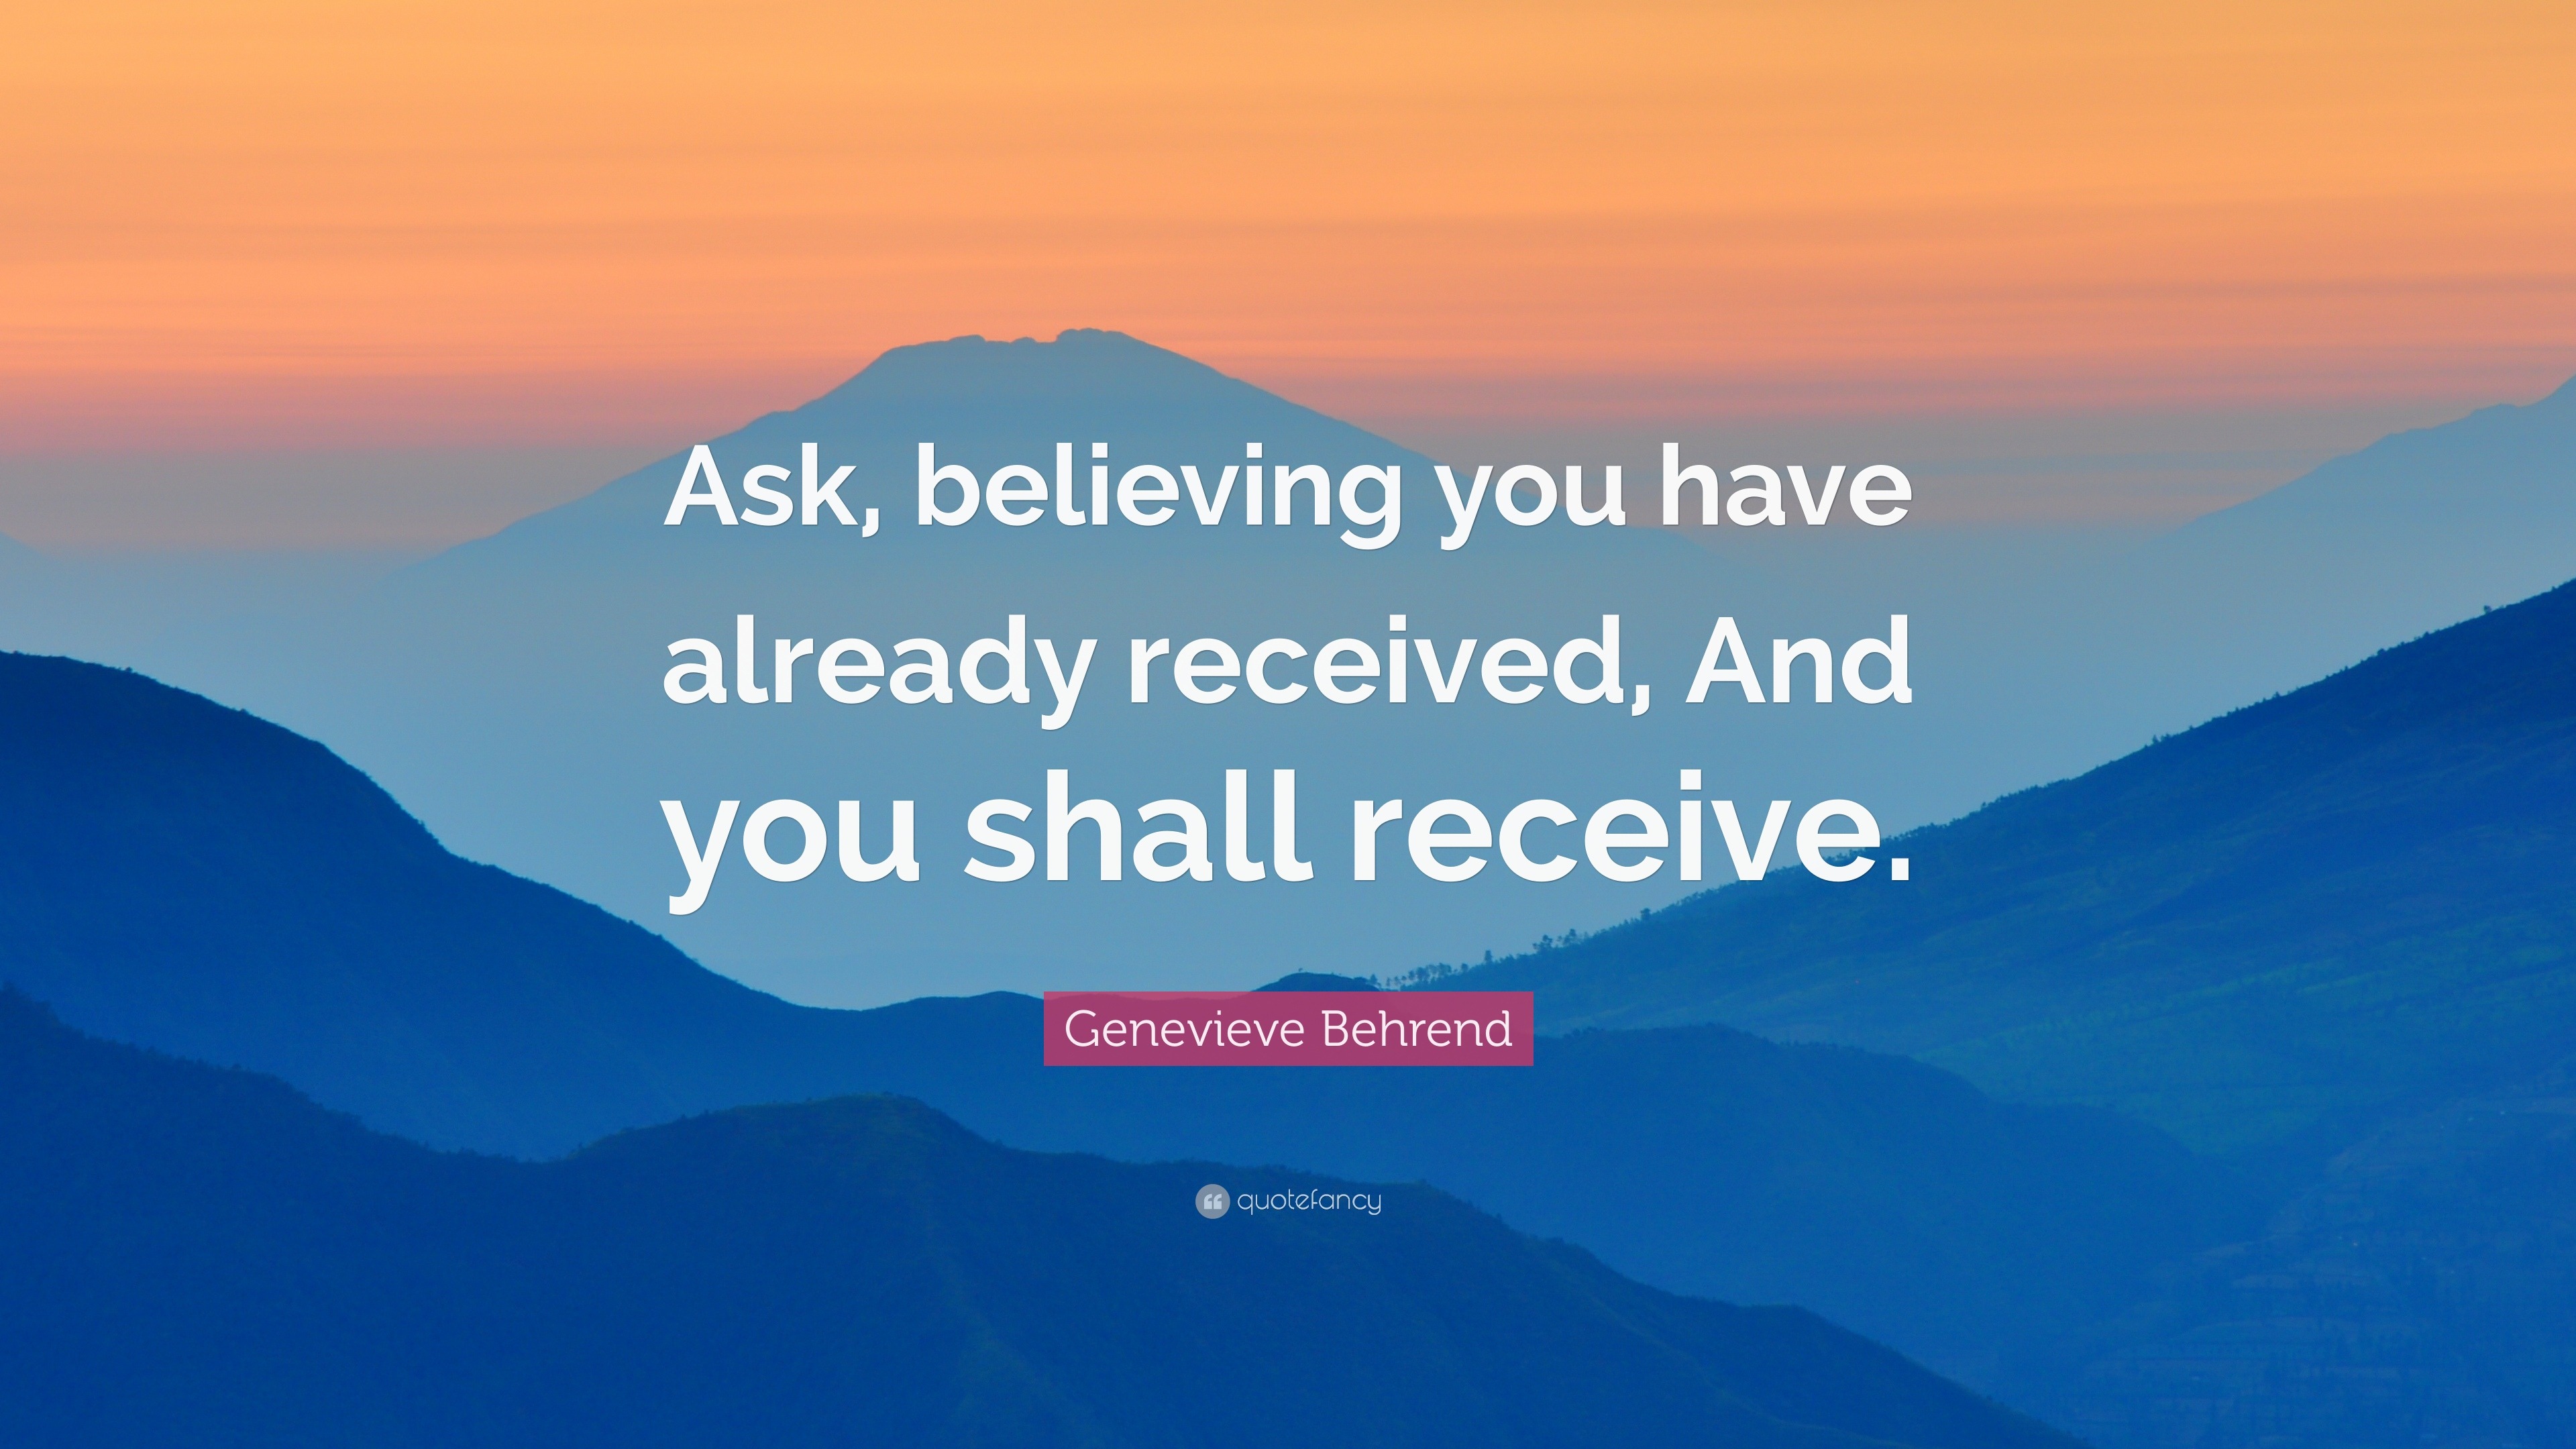 Genevieve Behrend Quote: “Ask, believing you have already received, And